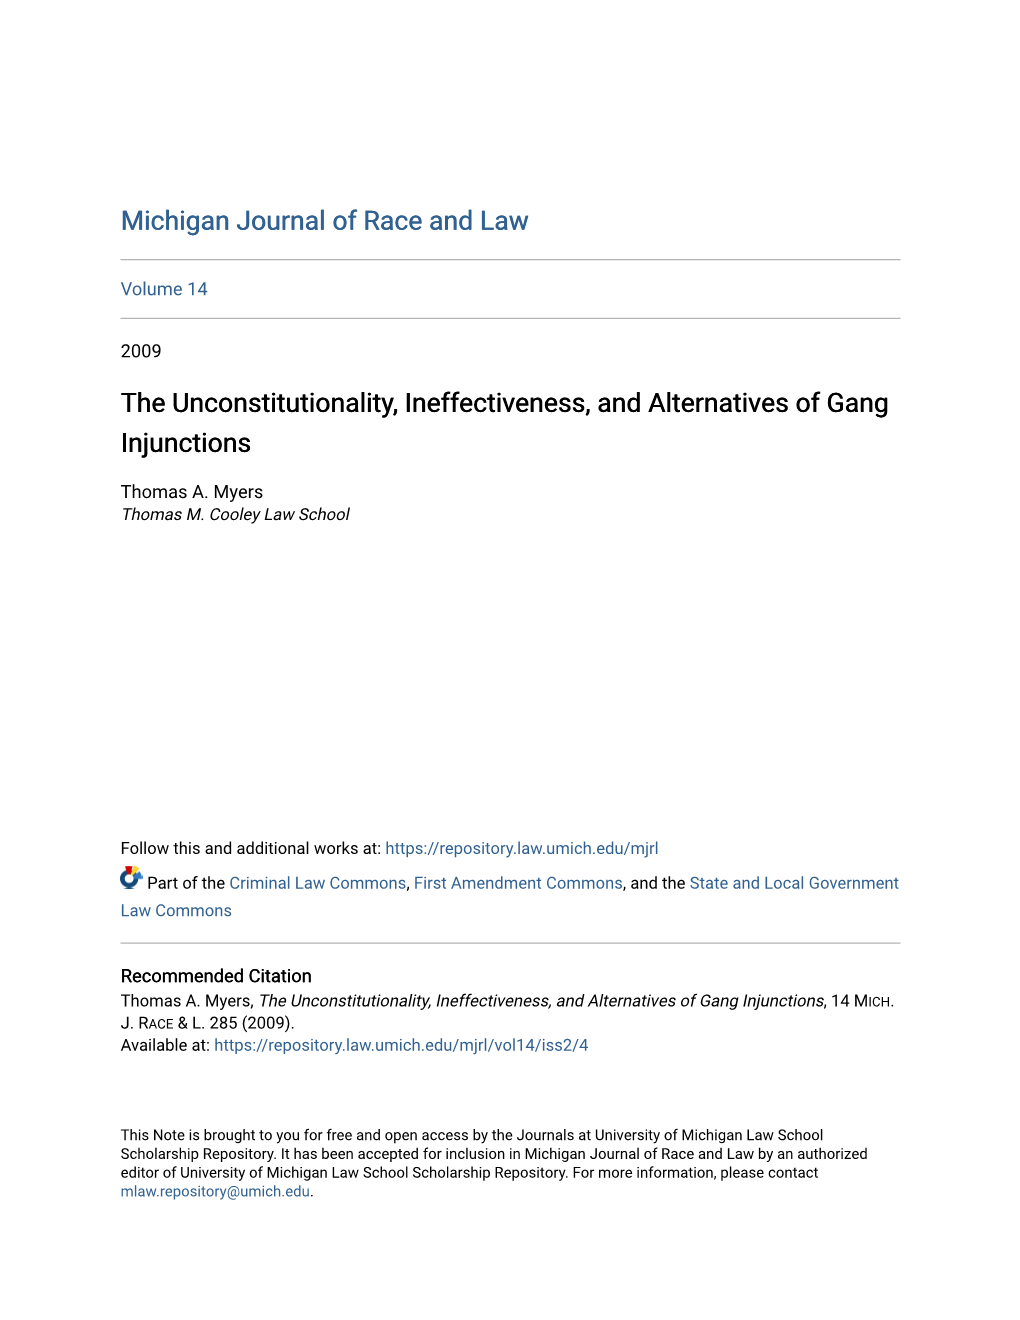 The Unconstitutionality, Ineffectiveness, and Alternatives of Gang Injunctions